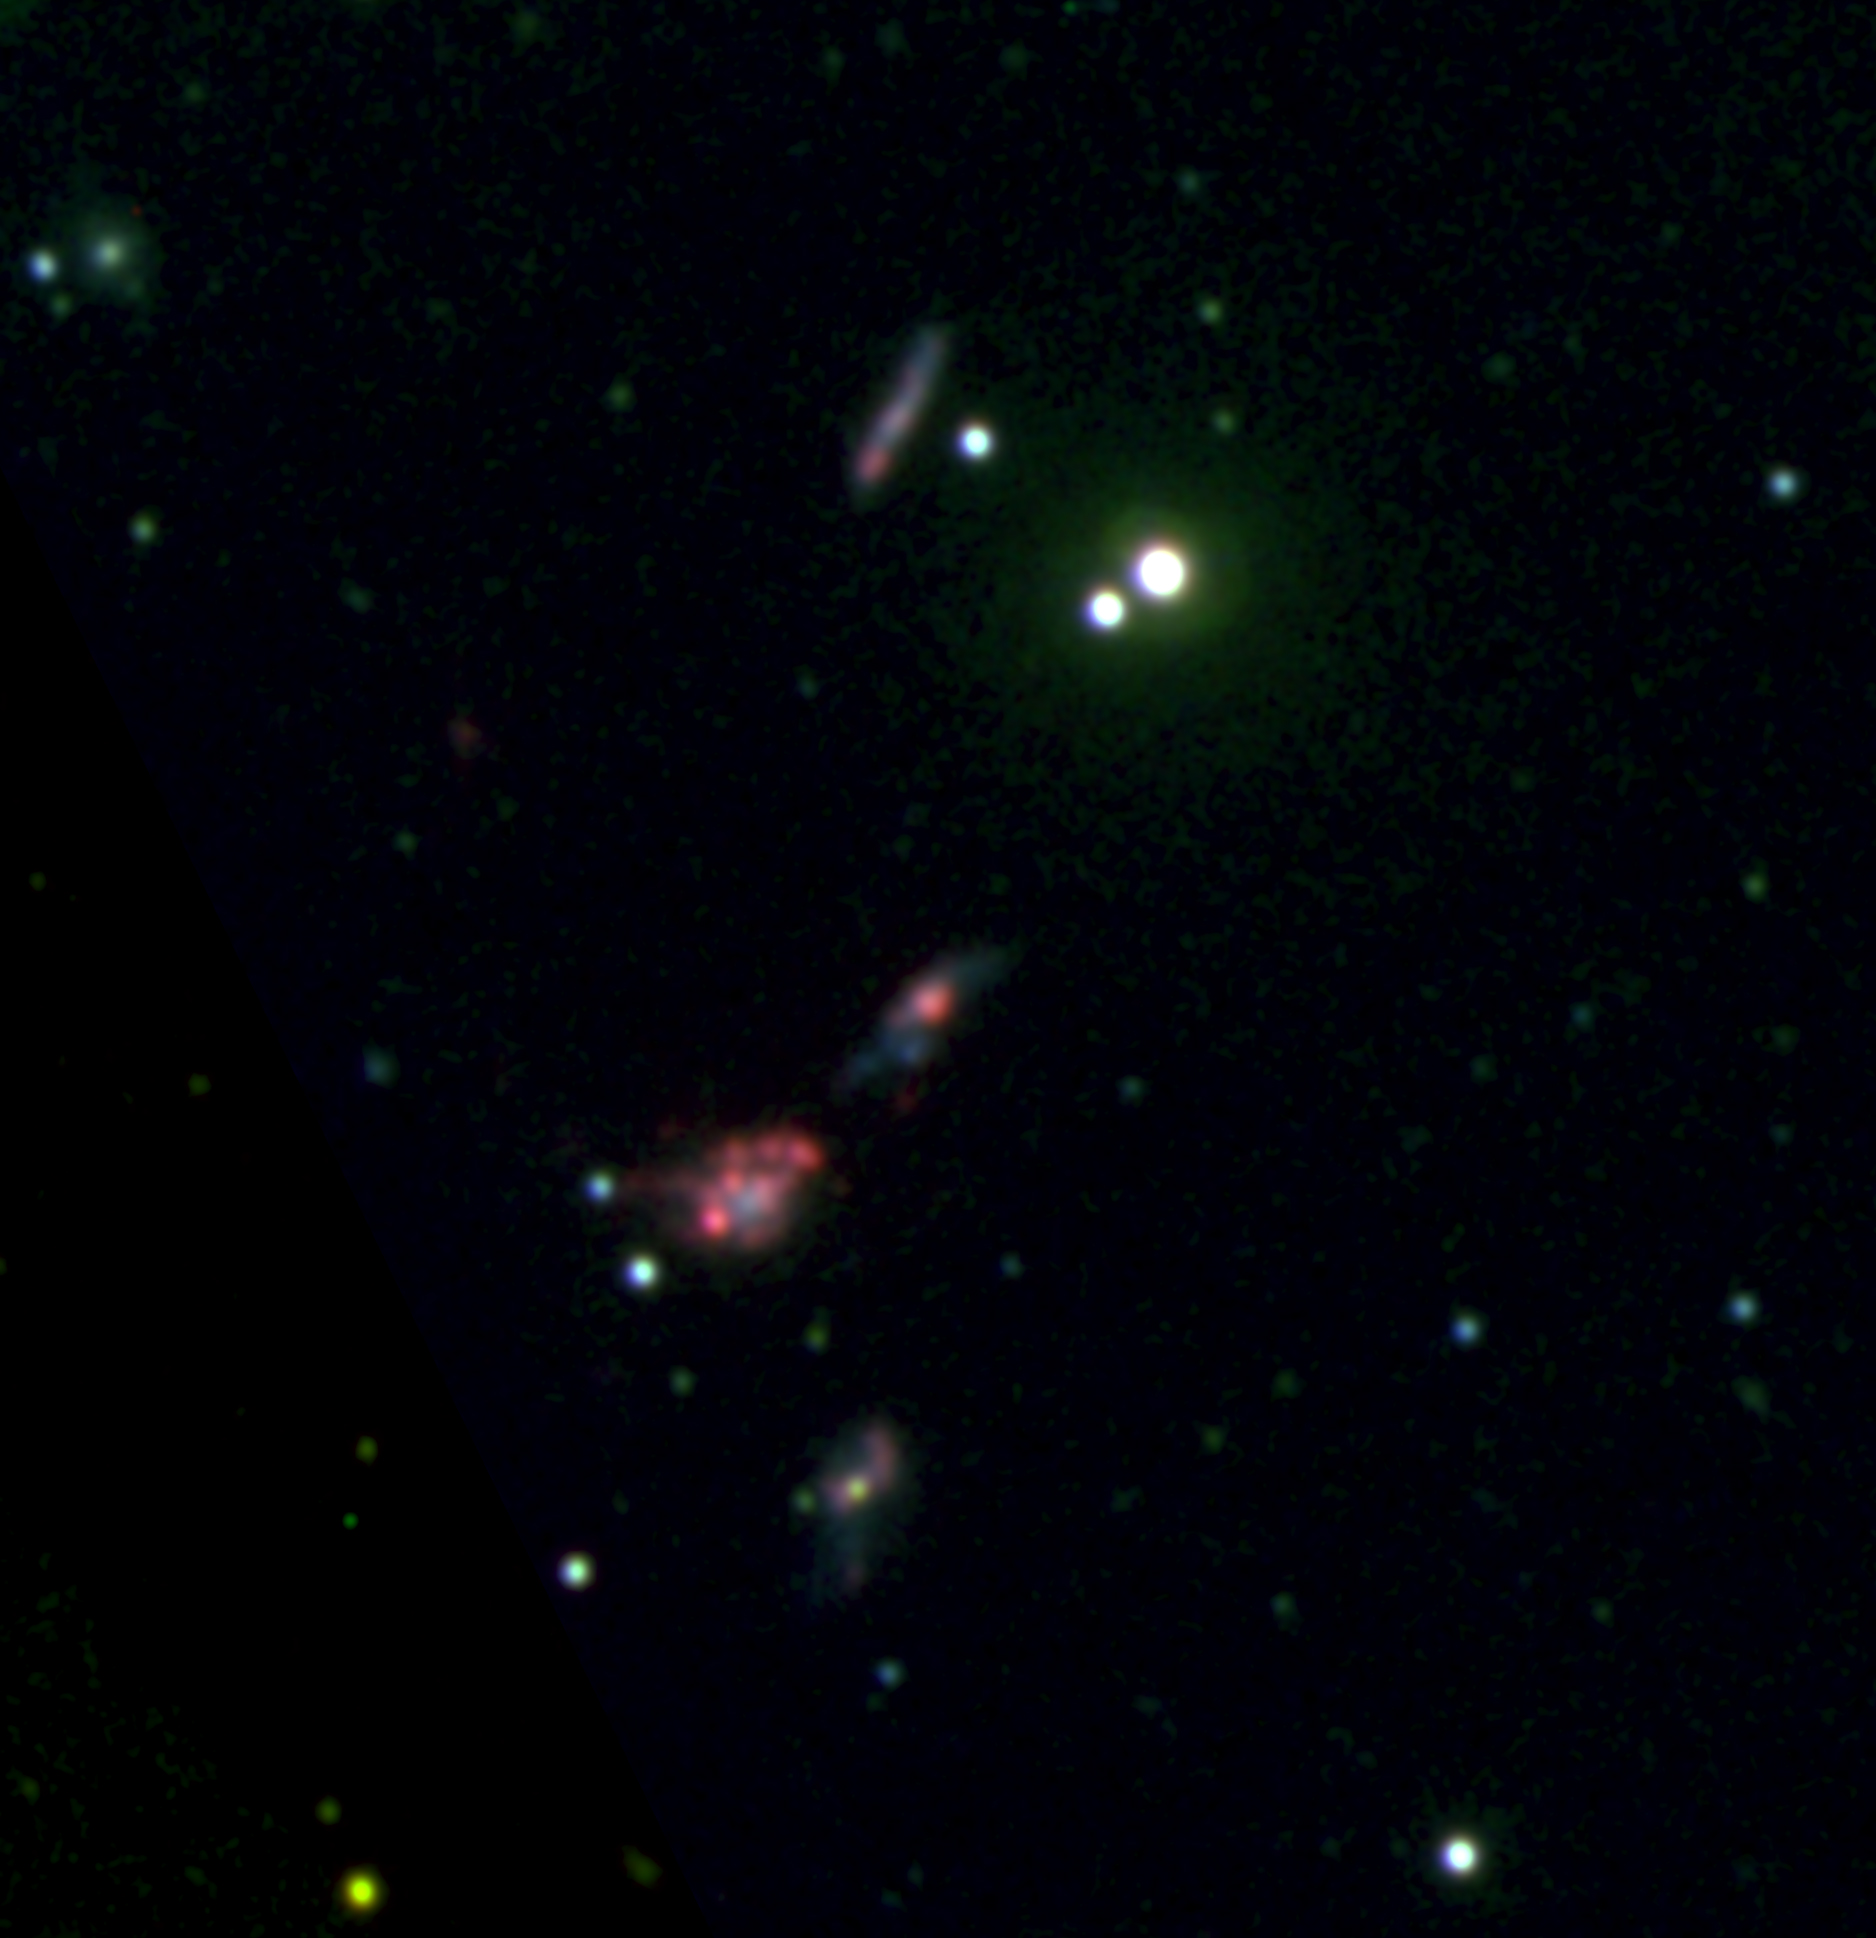 A handout photo released on January 23, 2017 by the Nature Publishing Group shows four of the dwarf galaxies. The first sighting of clustered dwarf galaxies bolsters a leading theory about how big galaxies such as our Milky Way are formed, and how dark matter binds them, researchers said on January 23. Theorised but never seen, the bundled galaxies were discovered using the largest optical survey of the night sky ever compiled, they reported in the journal Nature Astronomy. Seven clusters of three-to-five galaxies are each 10 to 1,000 times smaller than the Milky Way.  / AFP PHOTO / NATURE PUBLISHING GROUP / Kelsey E Johnson, Sandra E Liss, and Sabrina Stierwalt / RESTRICTED TO EDITORIAL USE - MANDATORY CREDIT "AFP PHOTO / NATURE PUBLISHING GROUP / Kelsey E Johnson, Sandra E Liss, and Sabrina Stierwalt" - NO MARKETING NO ADVERTISING CAMPAIGNS - DISTRIBUTED AS A SERVICE TO CLIENTS